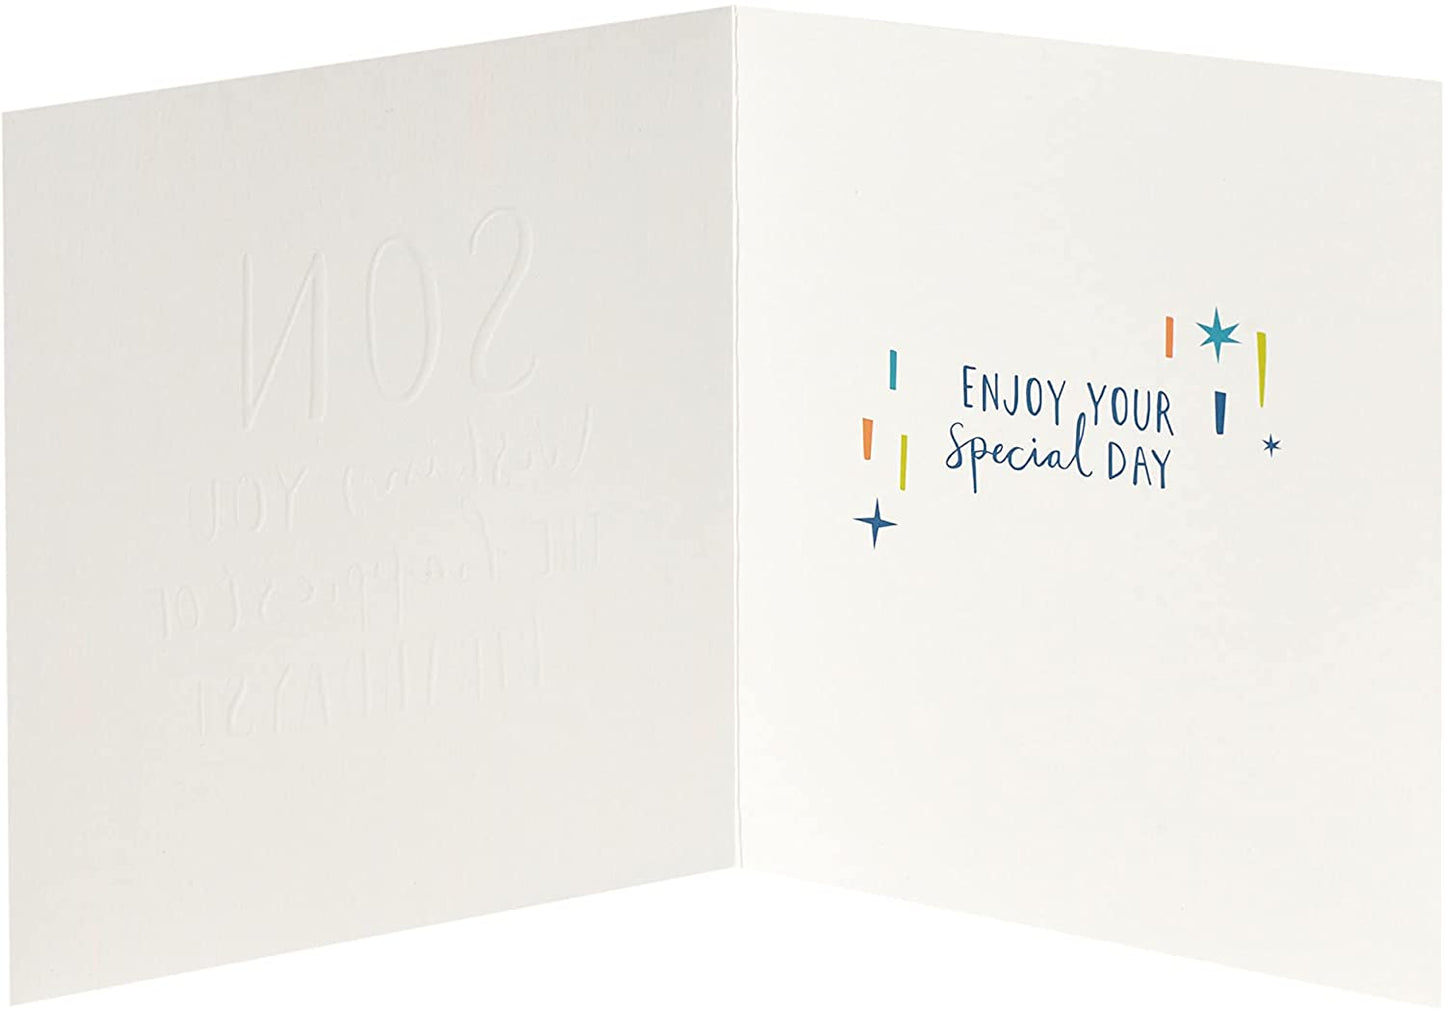 Gold Foil Lettering Son Birthday Card